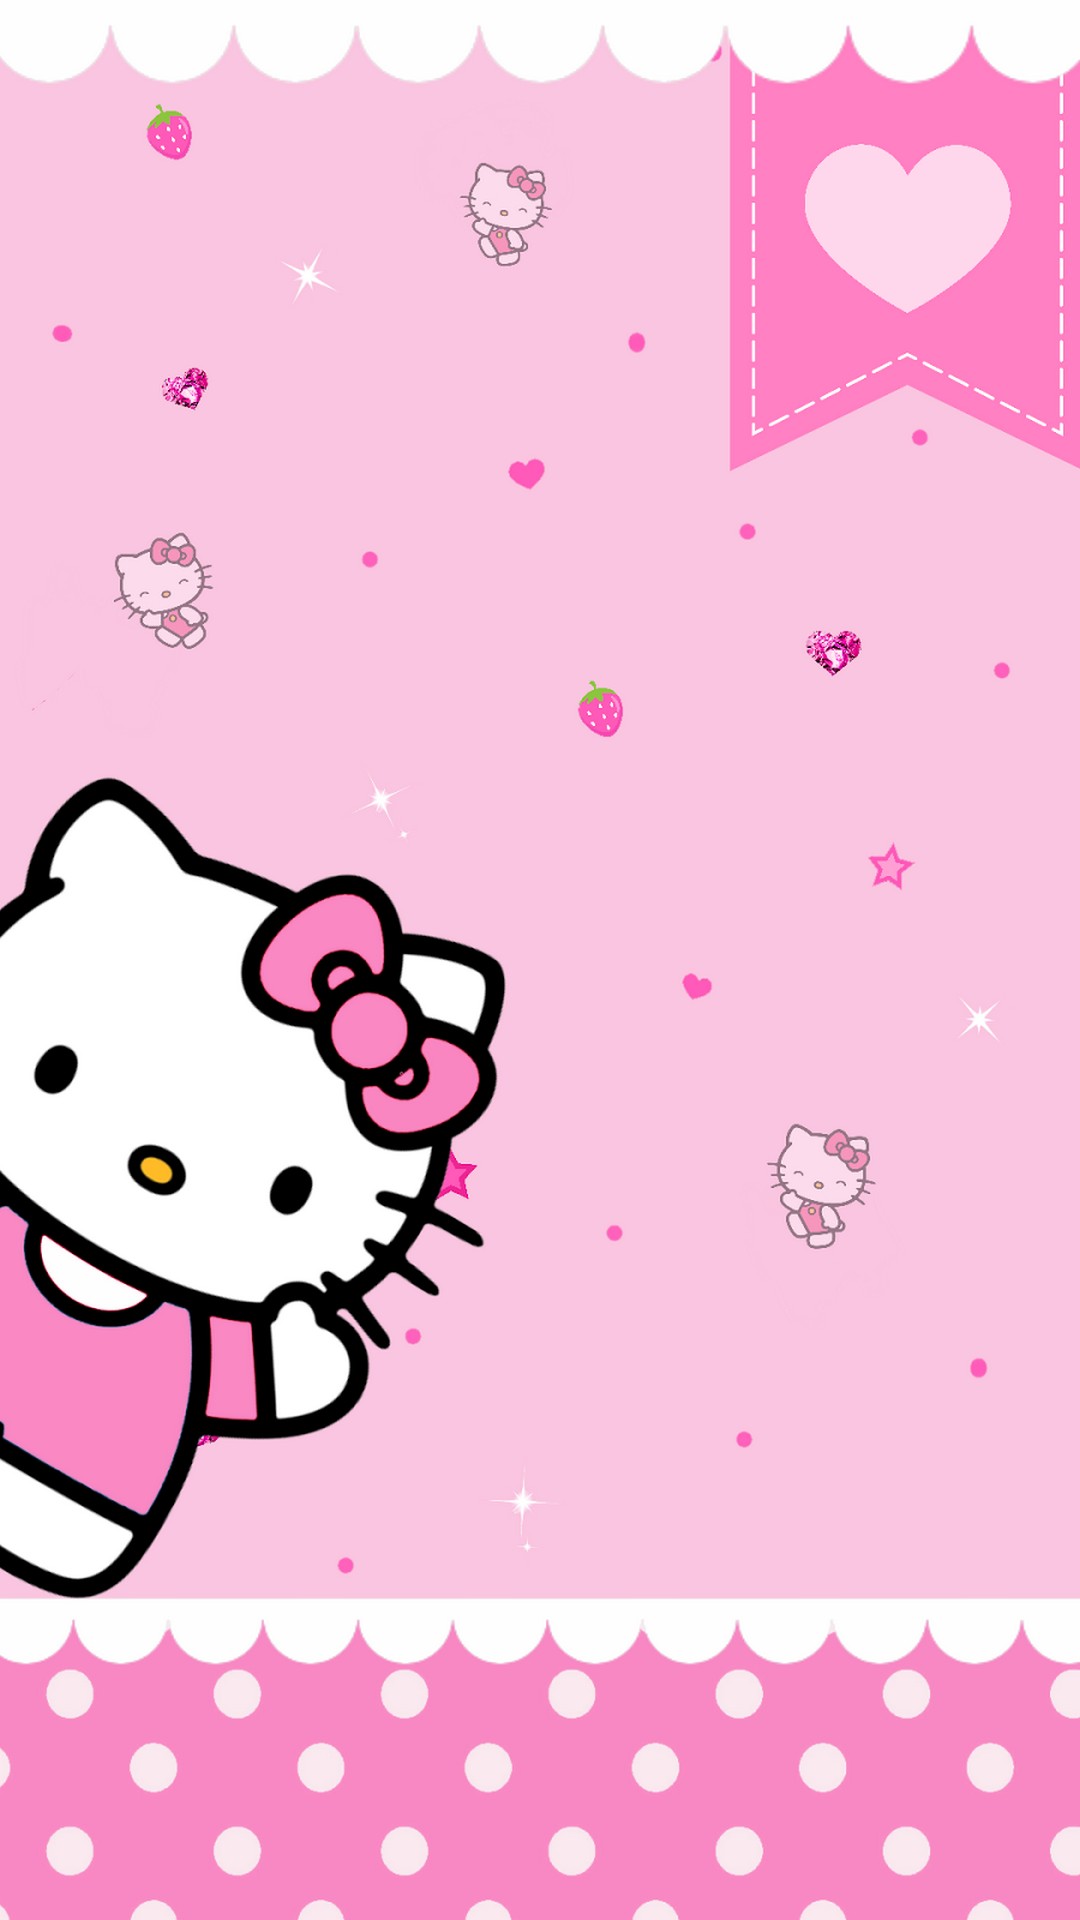 Hello Kitty Pictures HD Wallpaper For iPhone with image resolution 1080x1920 pixel. You can use this wallpaper as background for your desktop Computer Screensavers, Android or iPhone smartphones